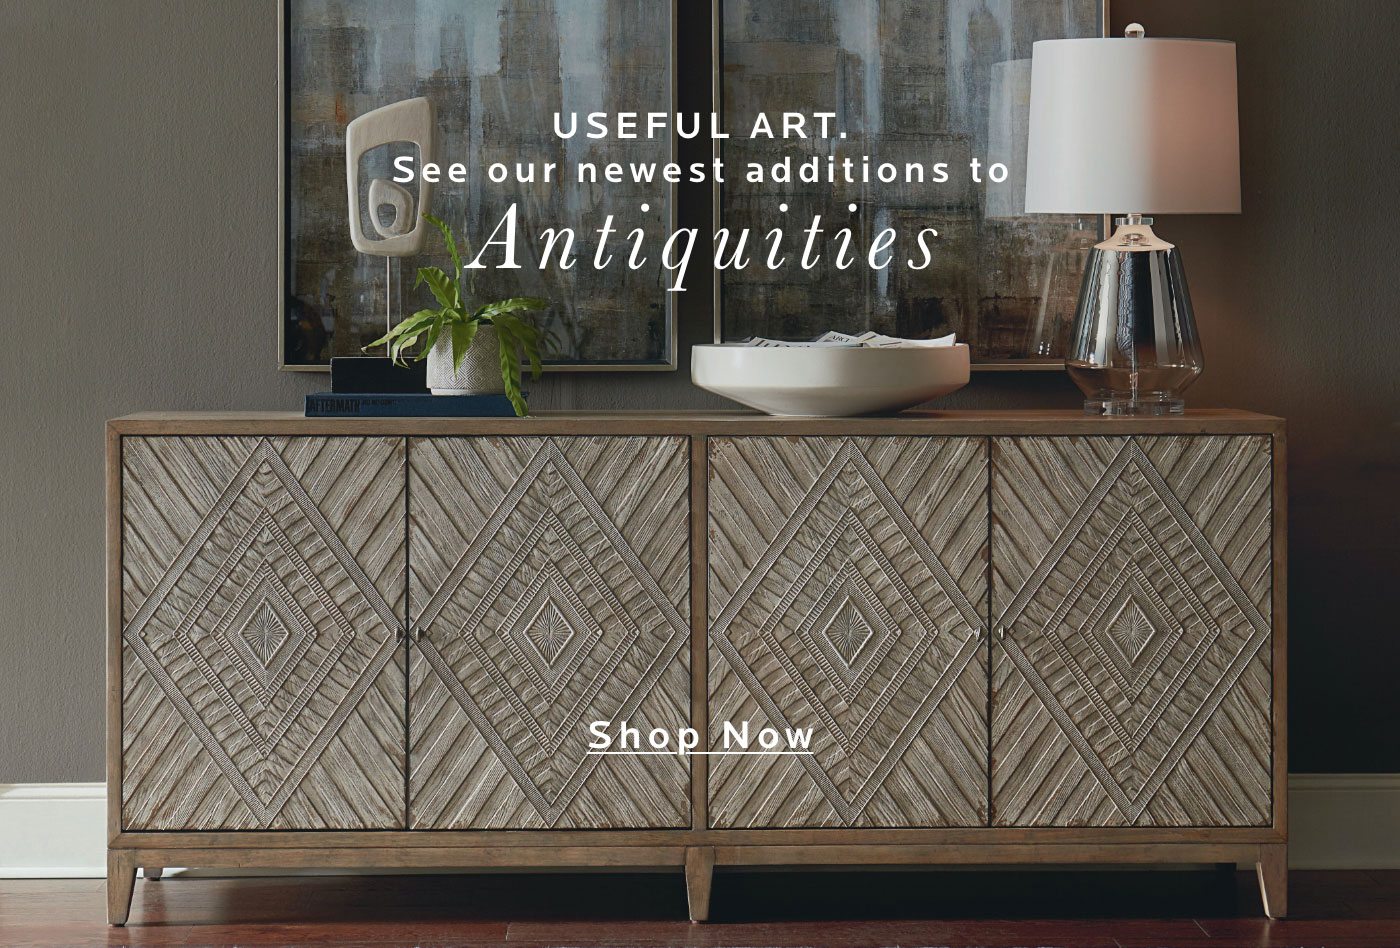 See our newest additions to Antiquities. Shop Now.